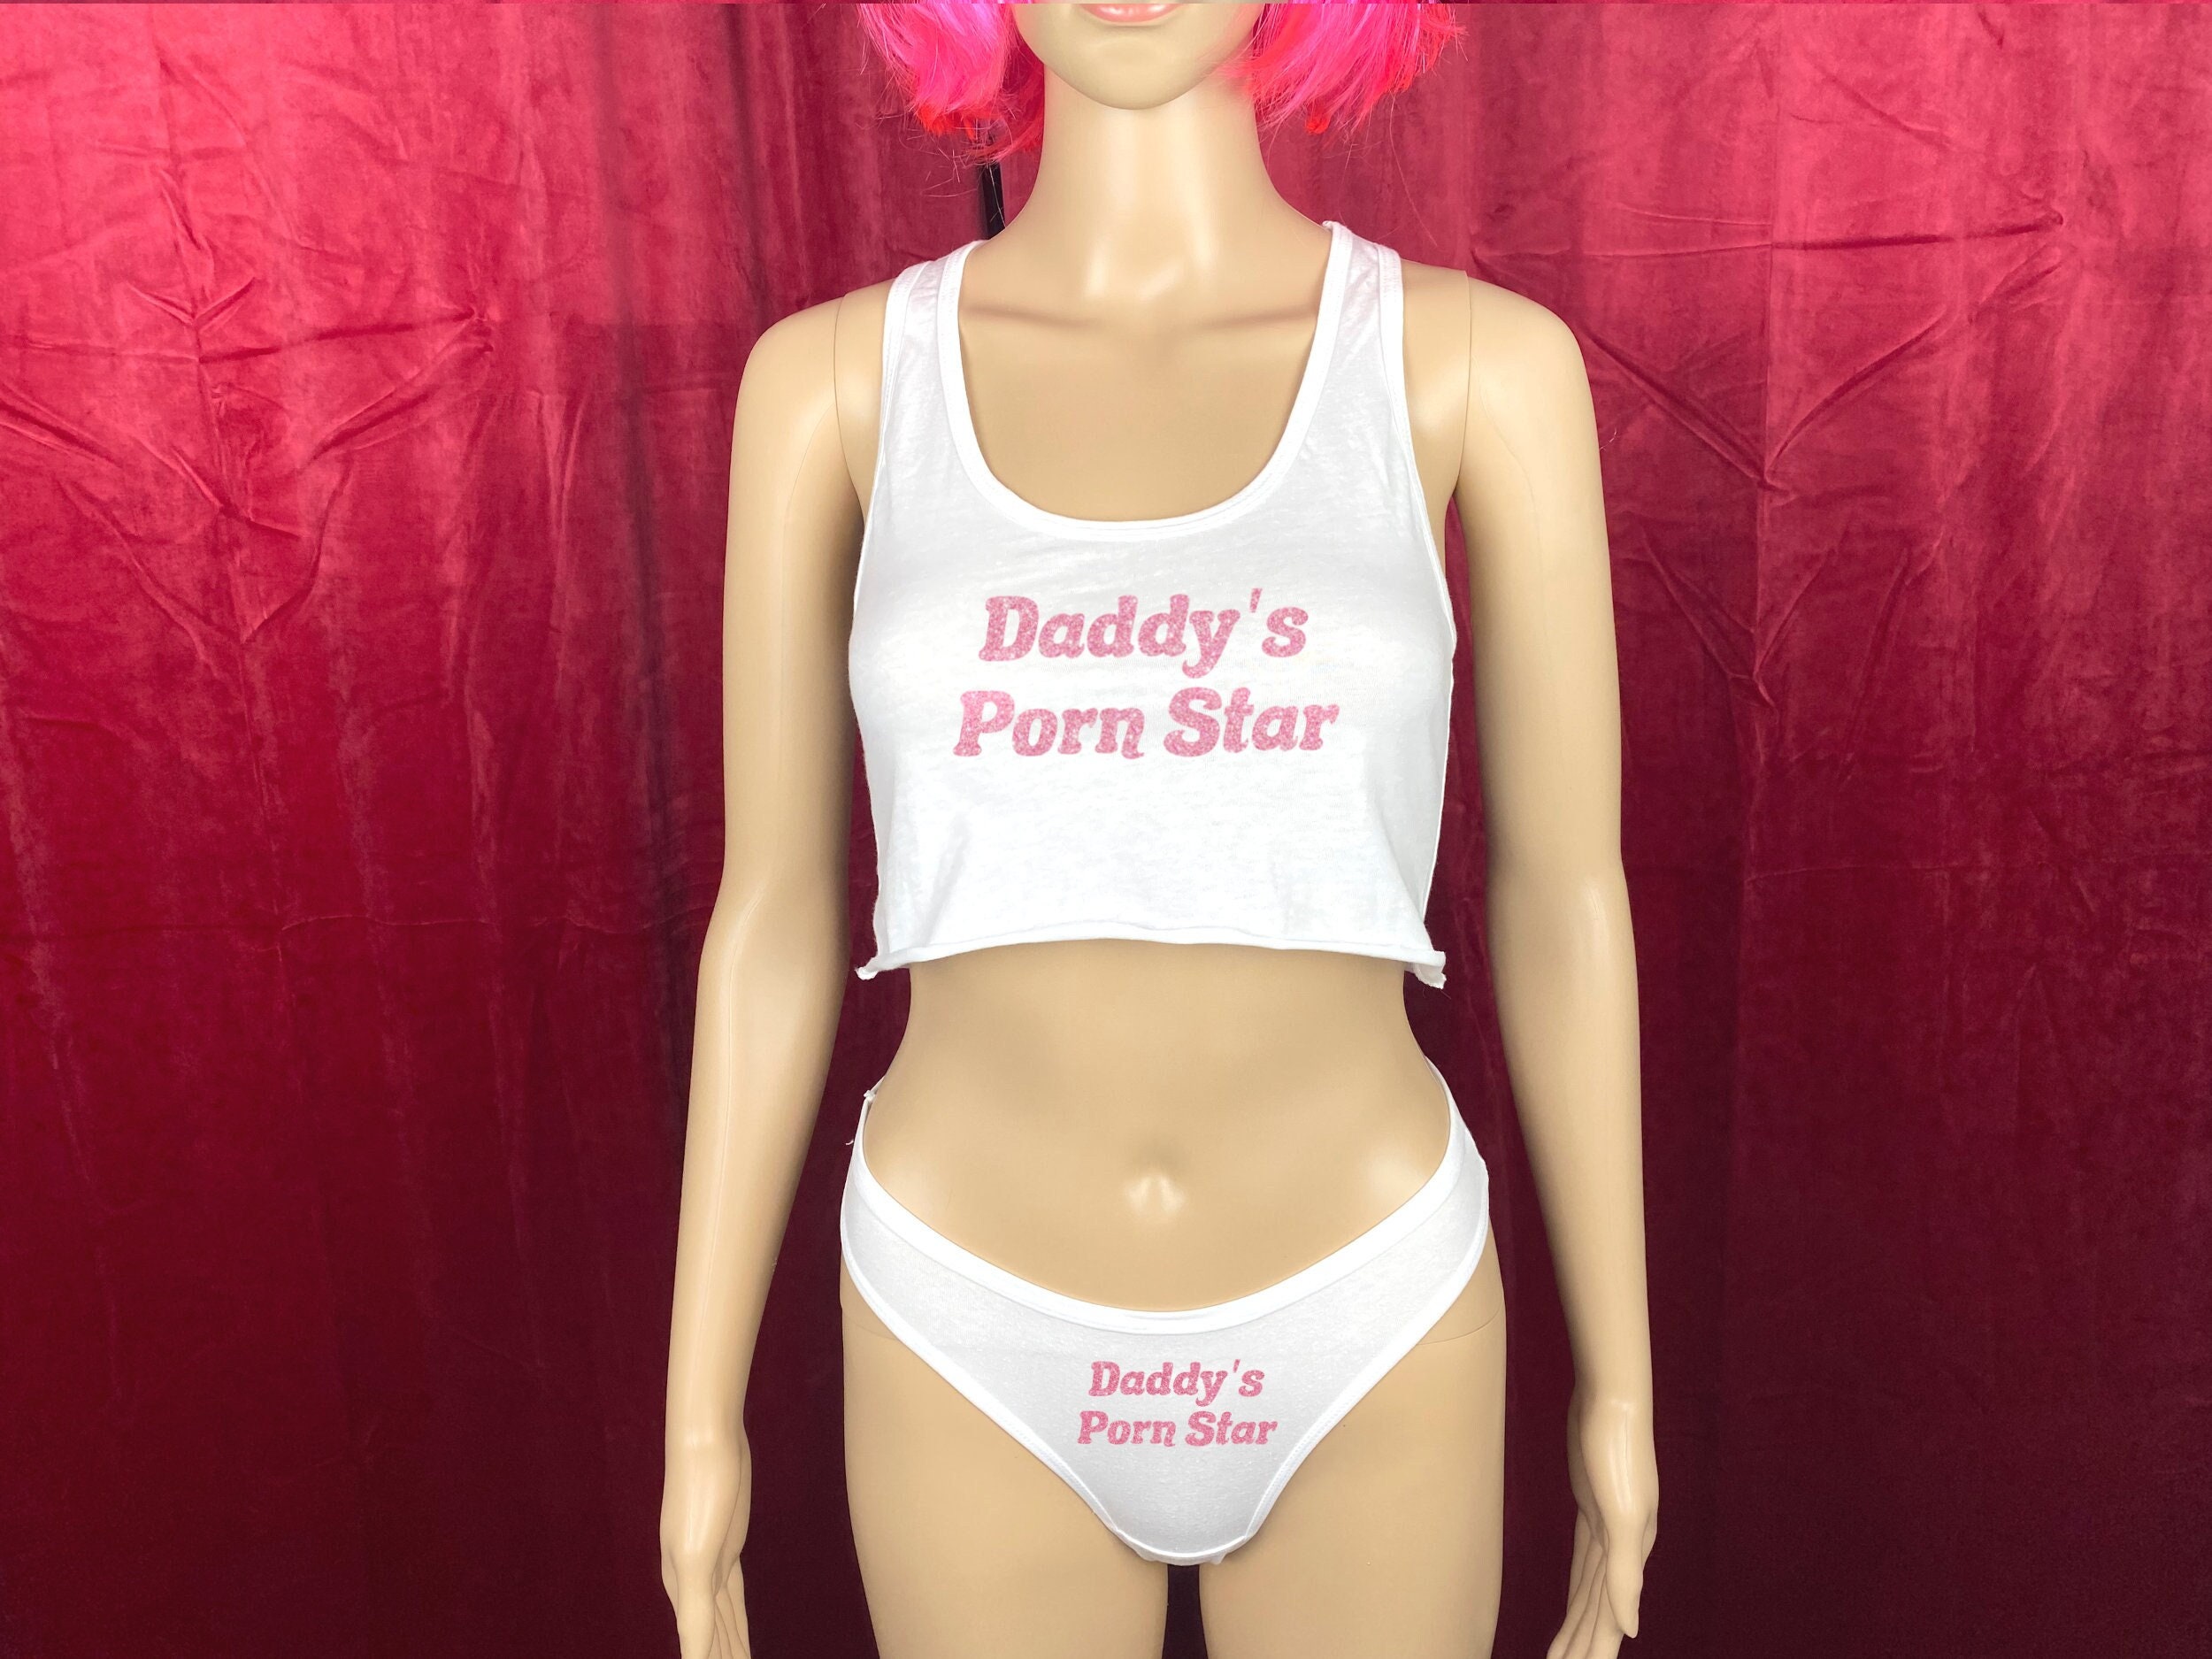 Daddys Pornstar Glitter Lingerie Set DDLG Submissive Clothing Bimbo Shirt  Kink Panties Yes Daddy Dom Clothes Slut Kawaii Outfit -  Canada